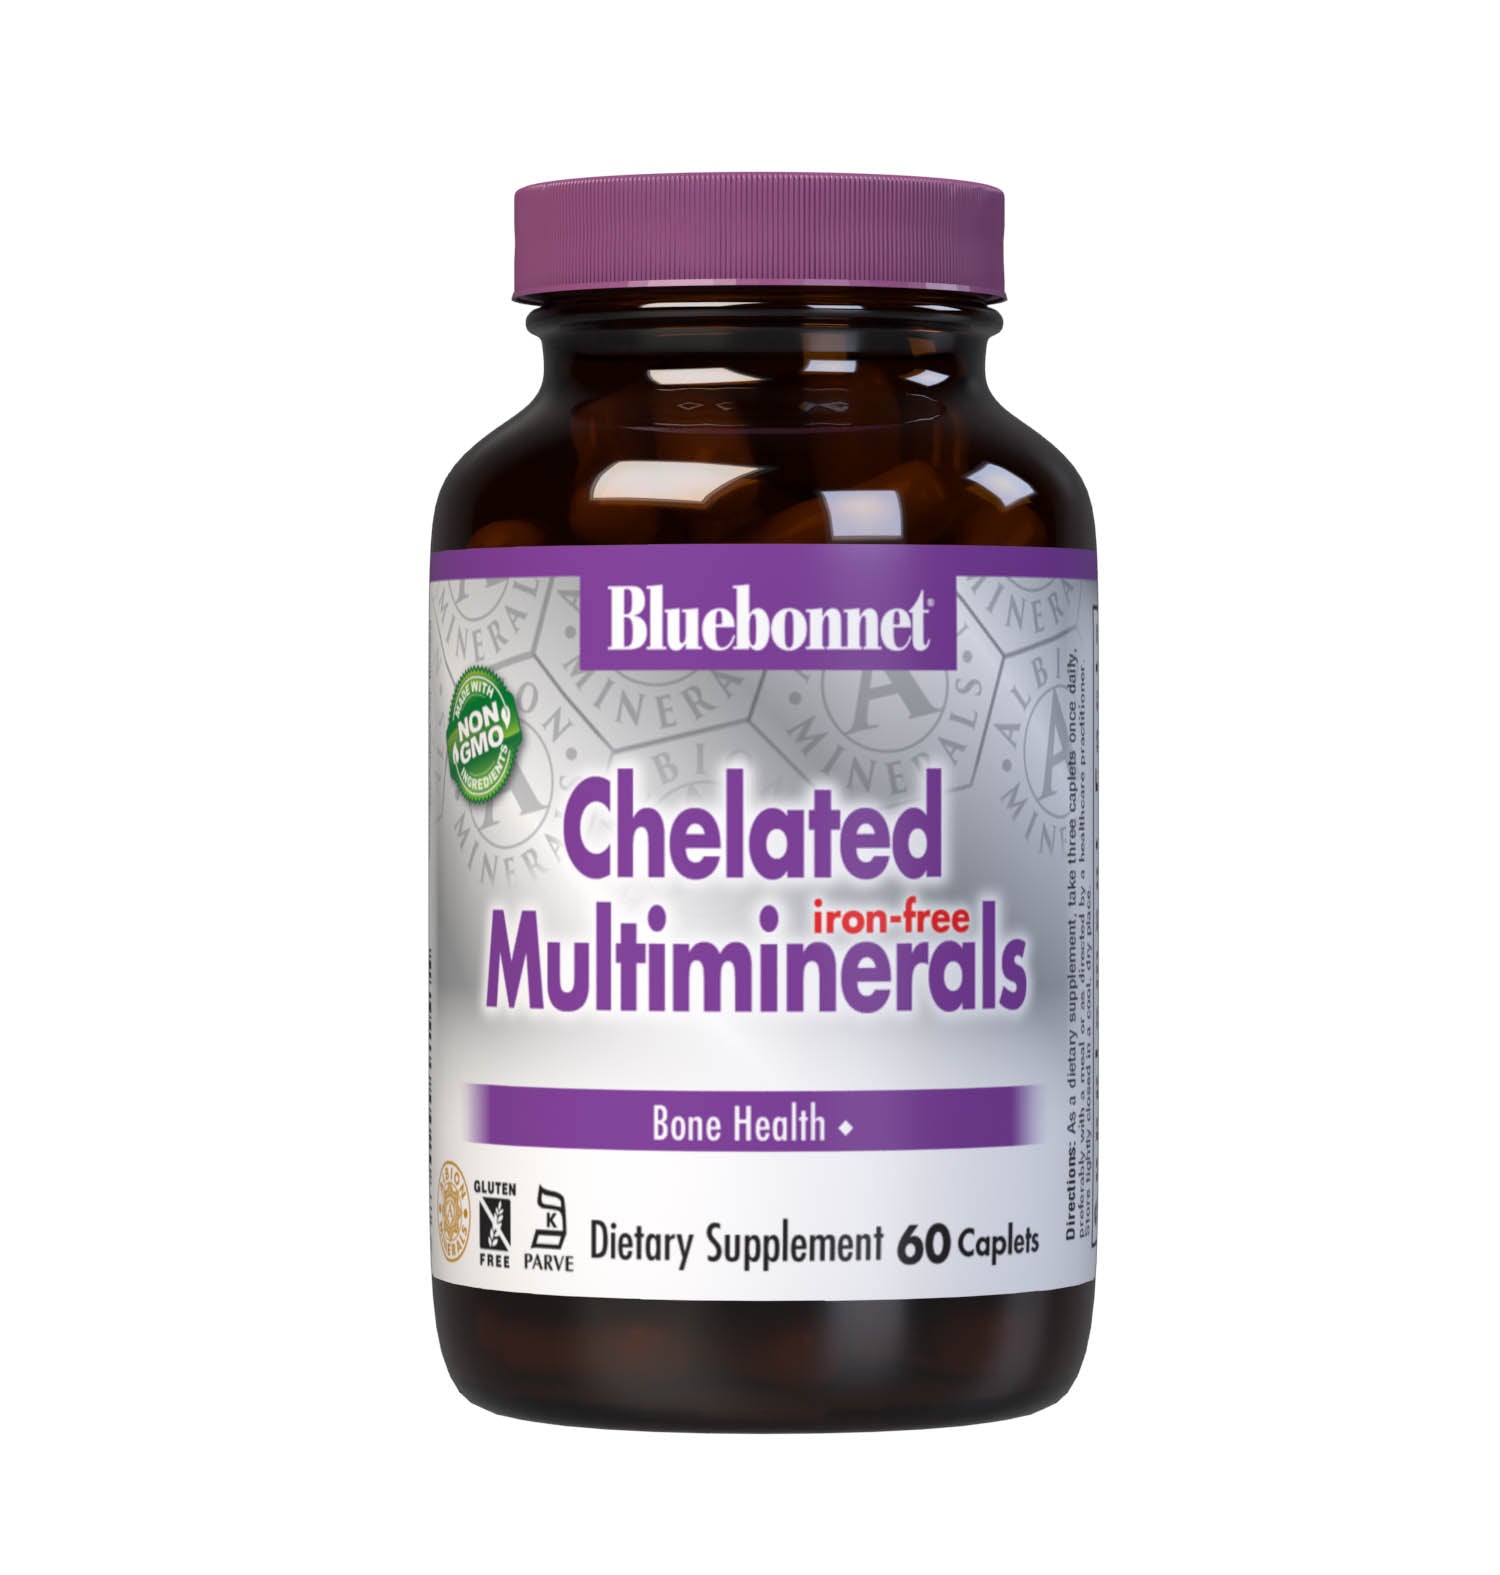 Bluebonnet’s Albion Chelated Multiminerals 60 Caplets (Iron-Free) are formulated with a fully reacted amino acid chelate multimineral supplement formulated with iron and advanced chelating agents, including: malates, citrates and glycinates. #size_60 count